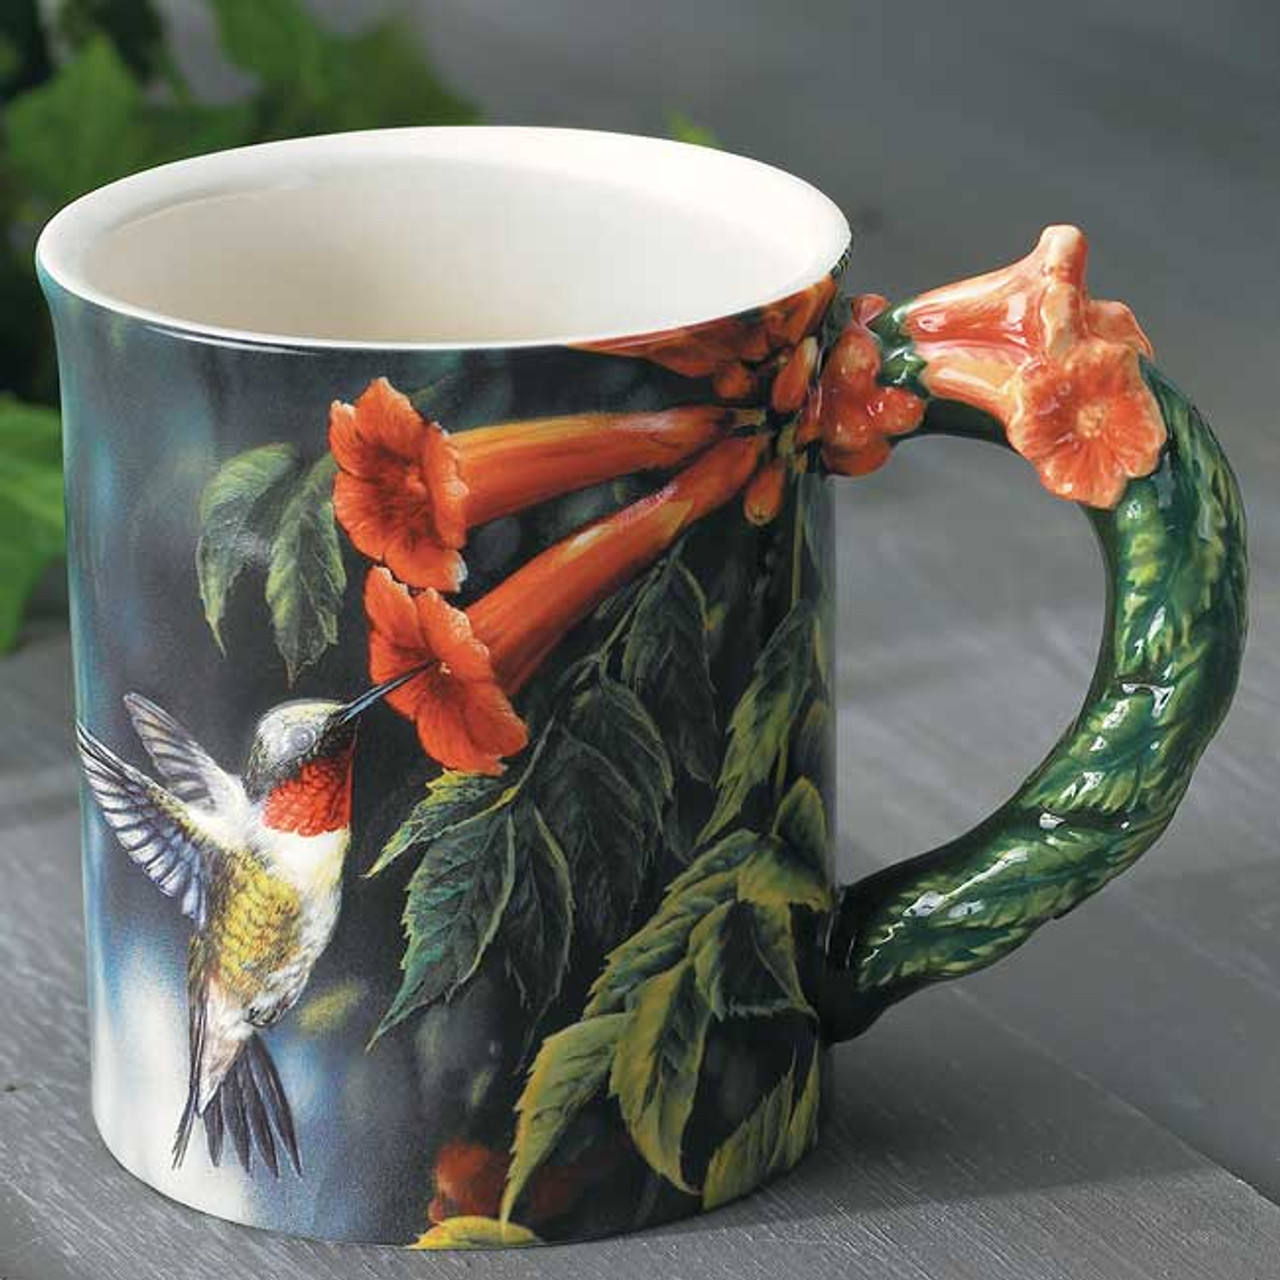 https://cdn11.bigcommerce.com/s-oo0gdojvjo/images/stencil/1280x1280/products/27549/37399/ruby-throated-hummingbird-sculpted-stoneware-coffee-mugs-set-of-6-wild-wings__52740.1537877576.jpg?c=2